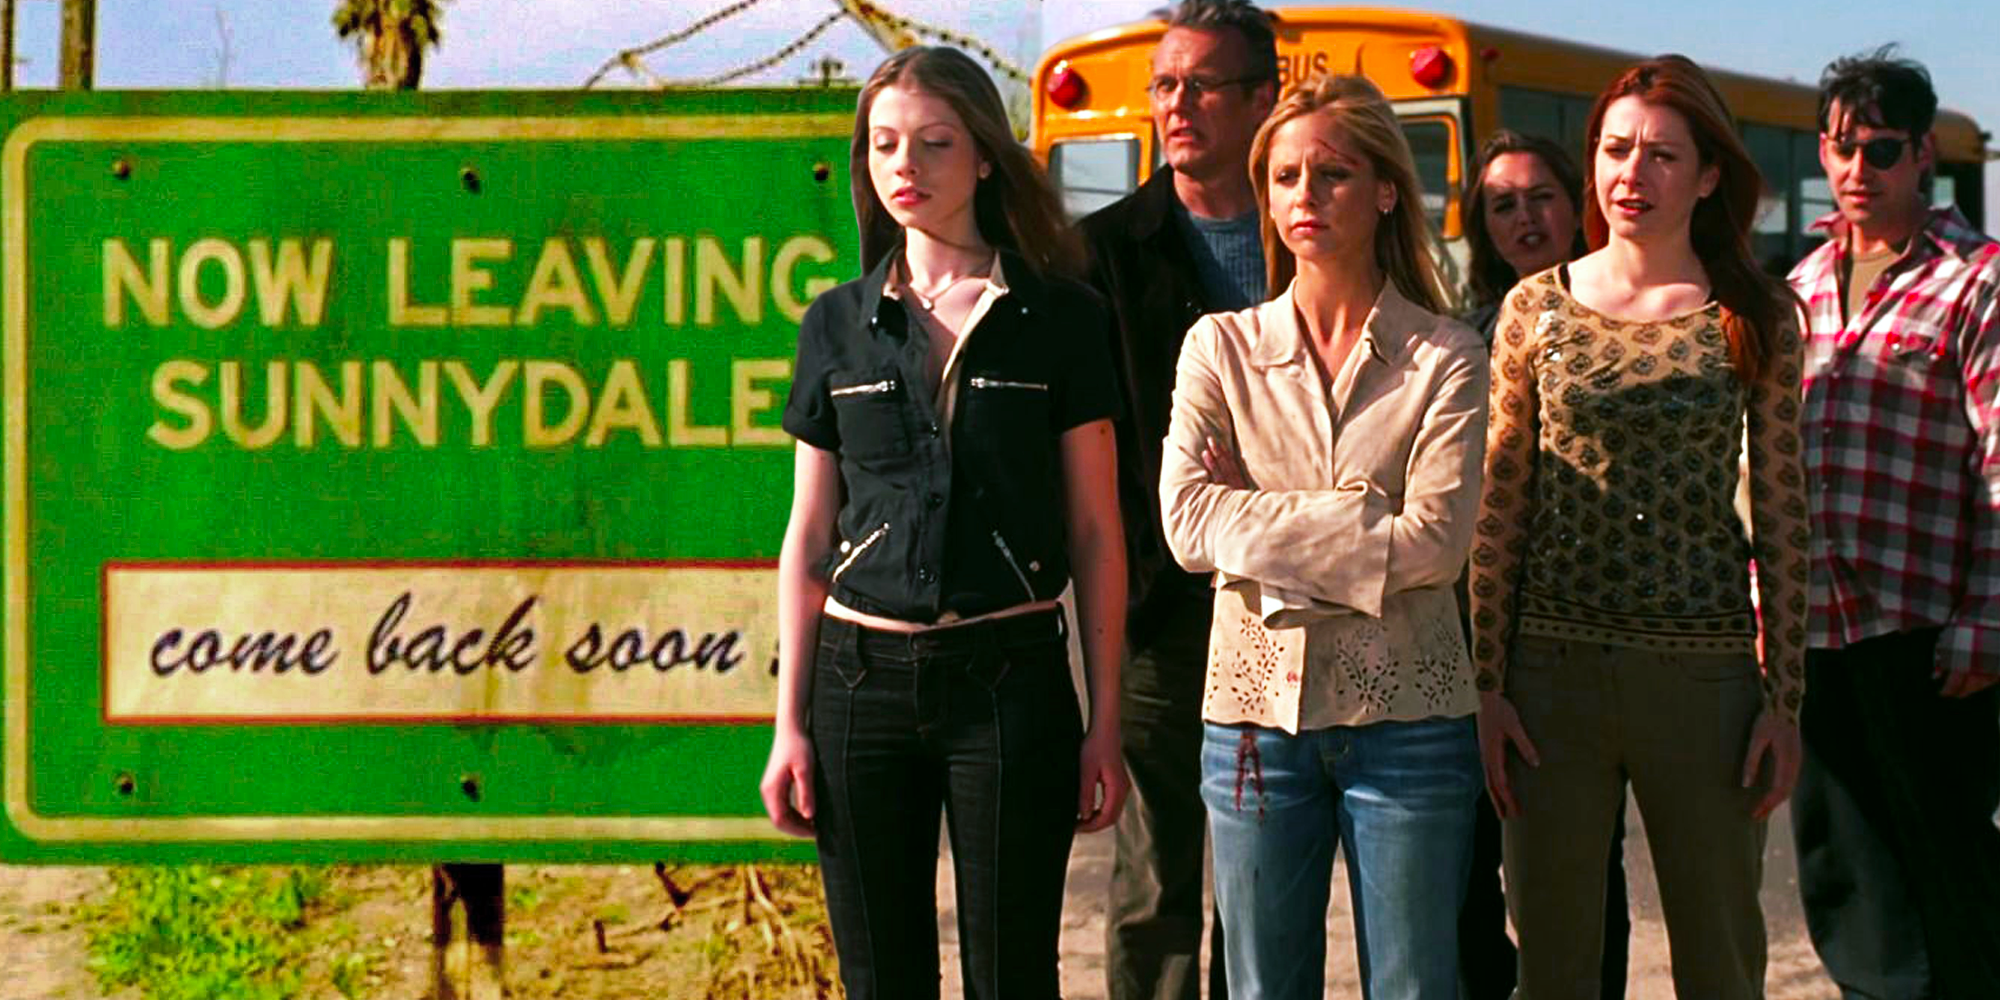 An image of Buffy and the Scooby gang standing next to the sign